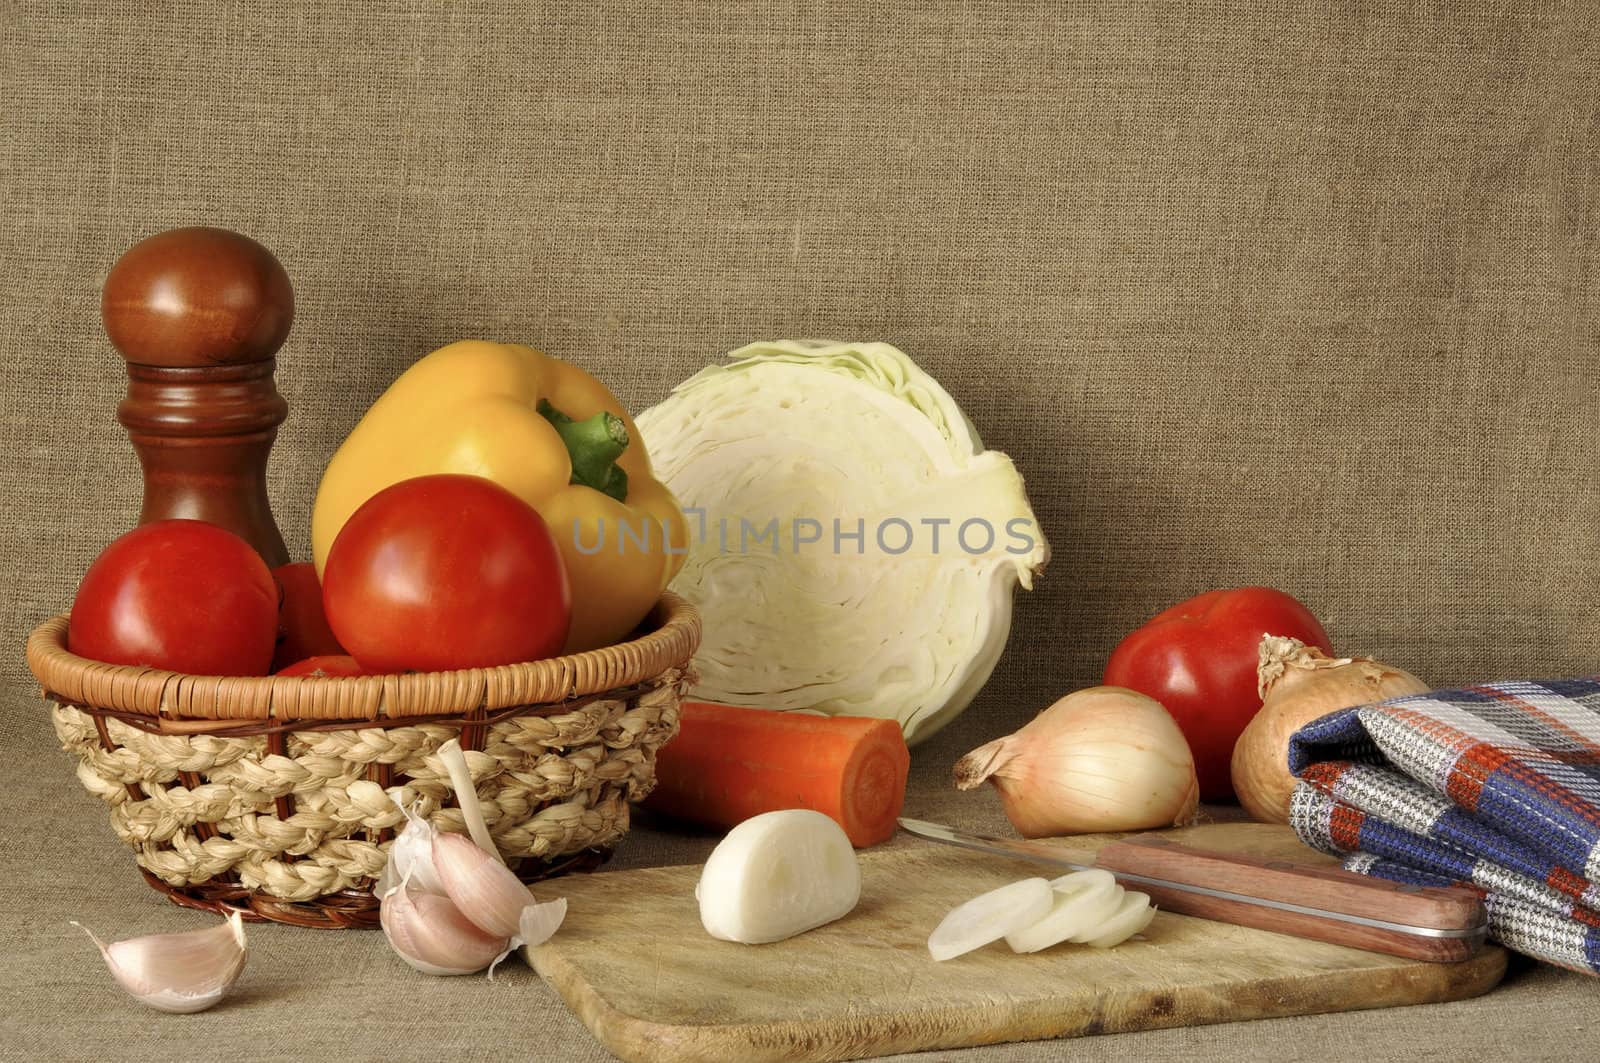 Vegetables different and wattled ware against a canvas
